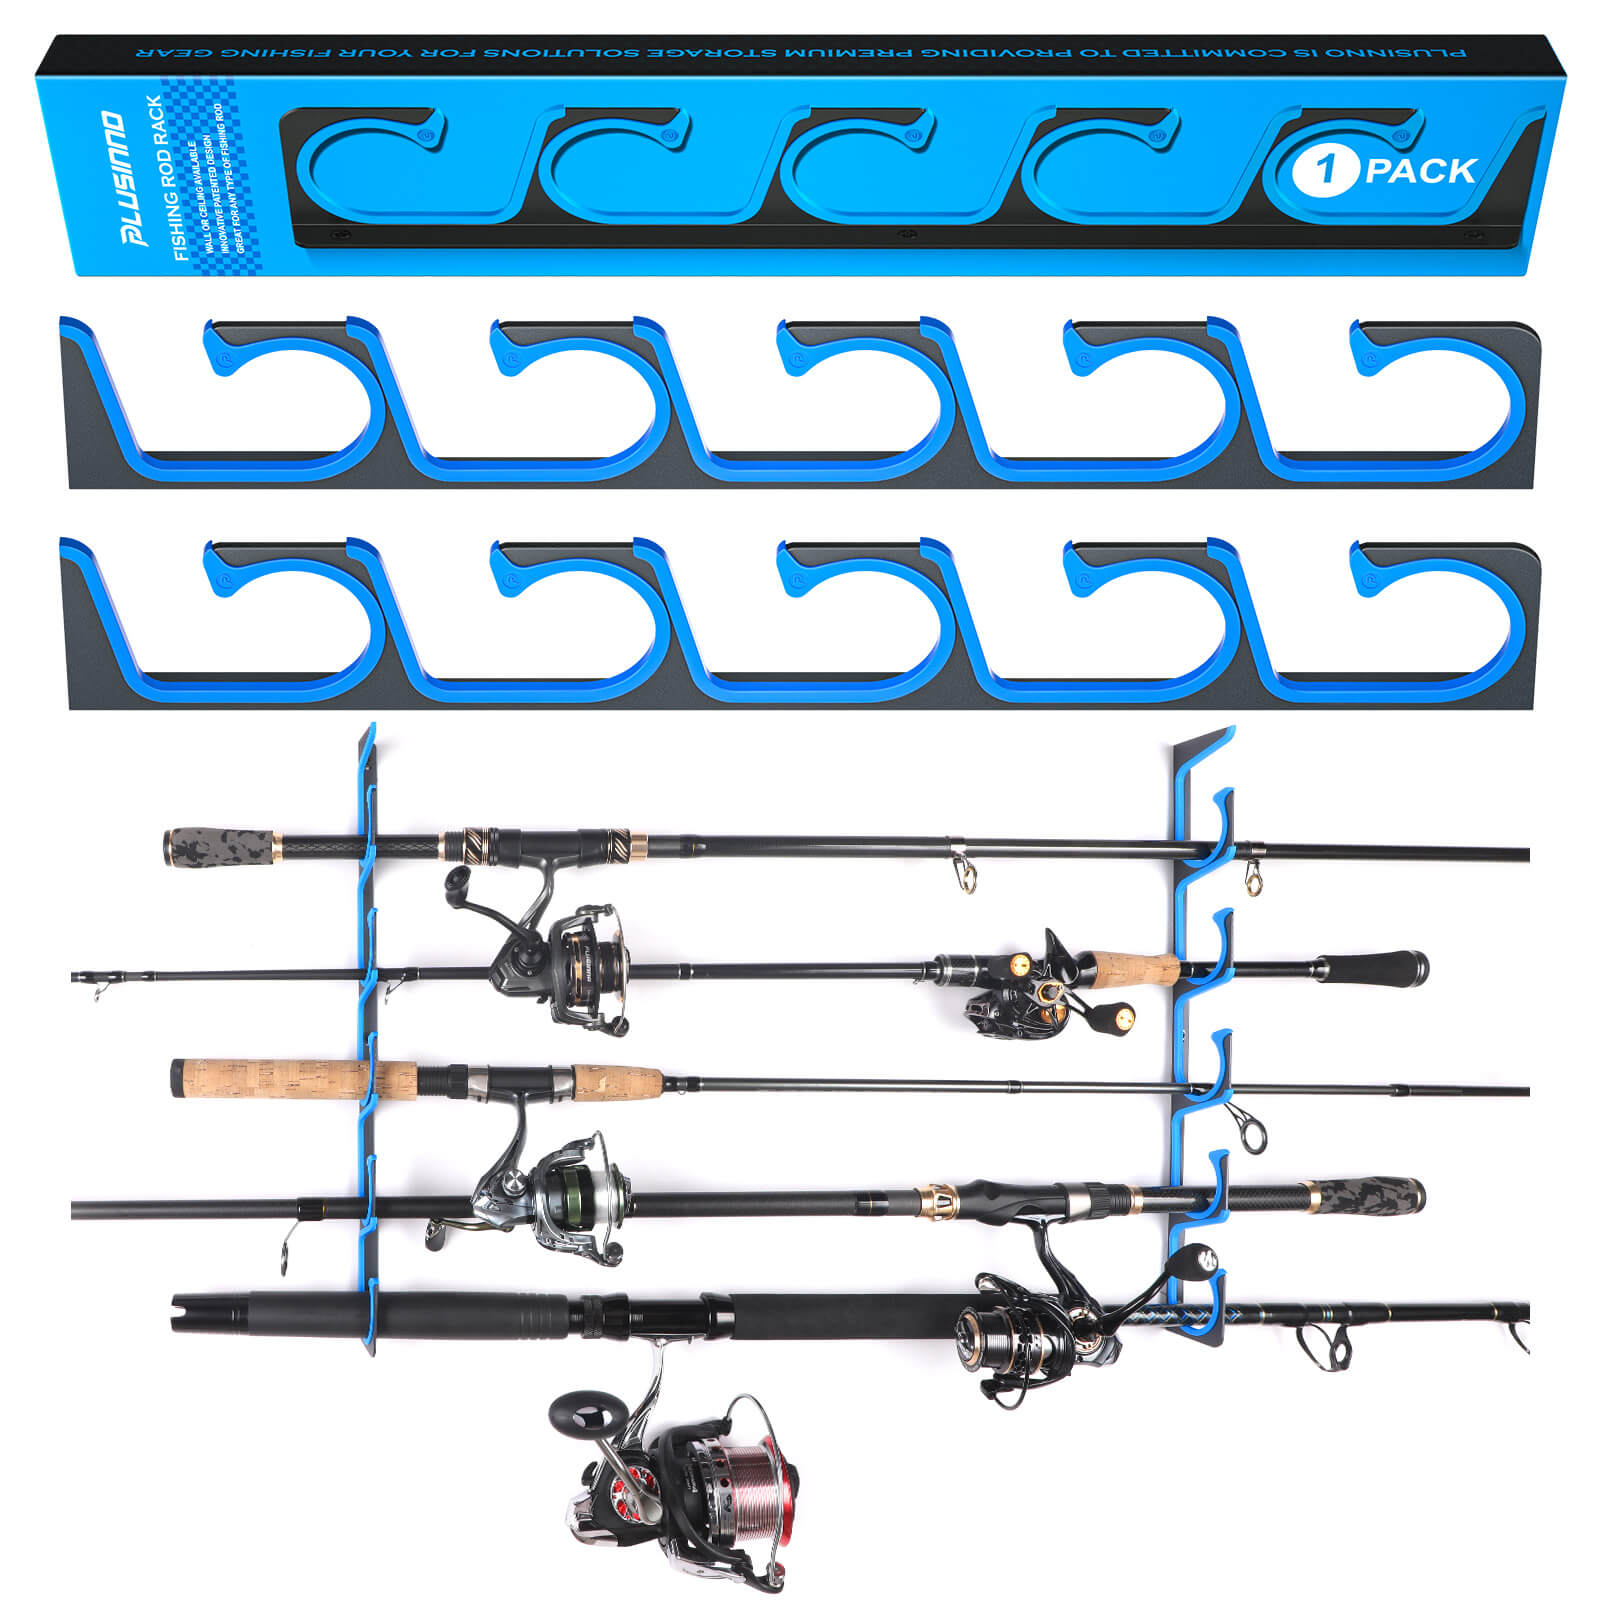 The Best Fishing Rod Racks For Your Home Or Office